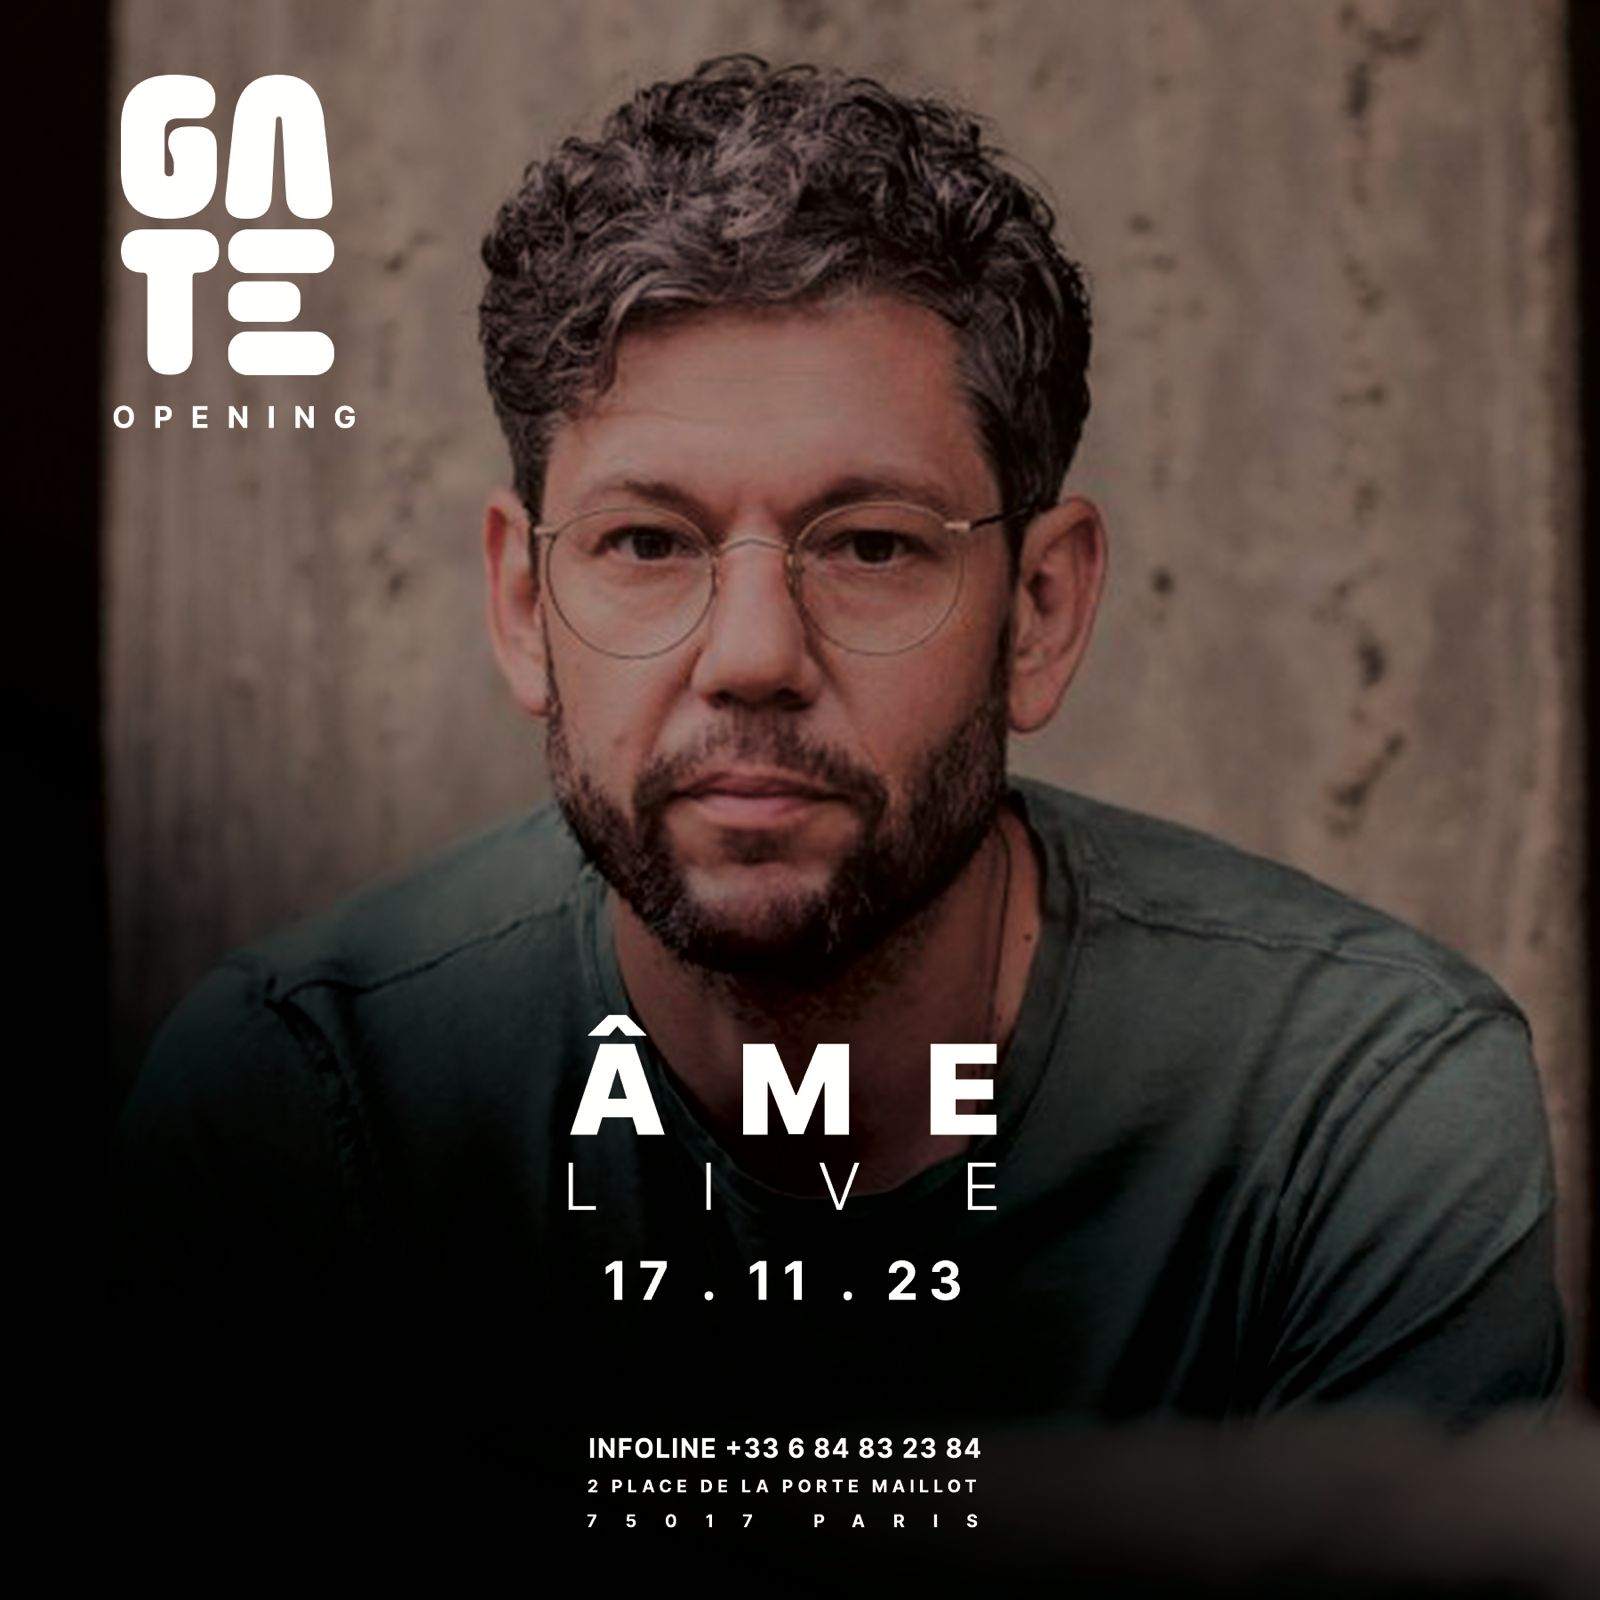 GATE club opening with Âme live - フライヤー表